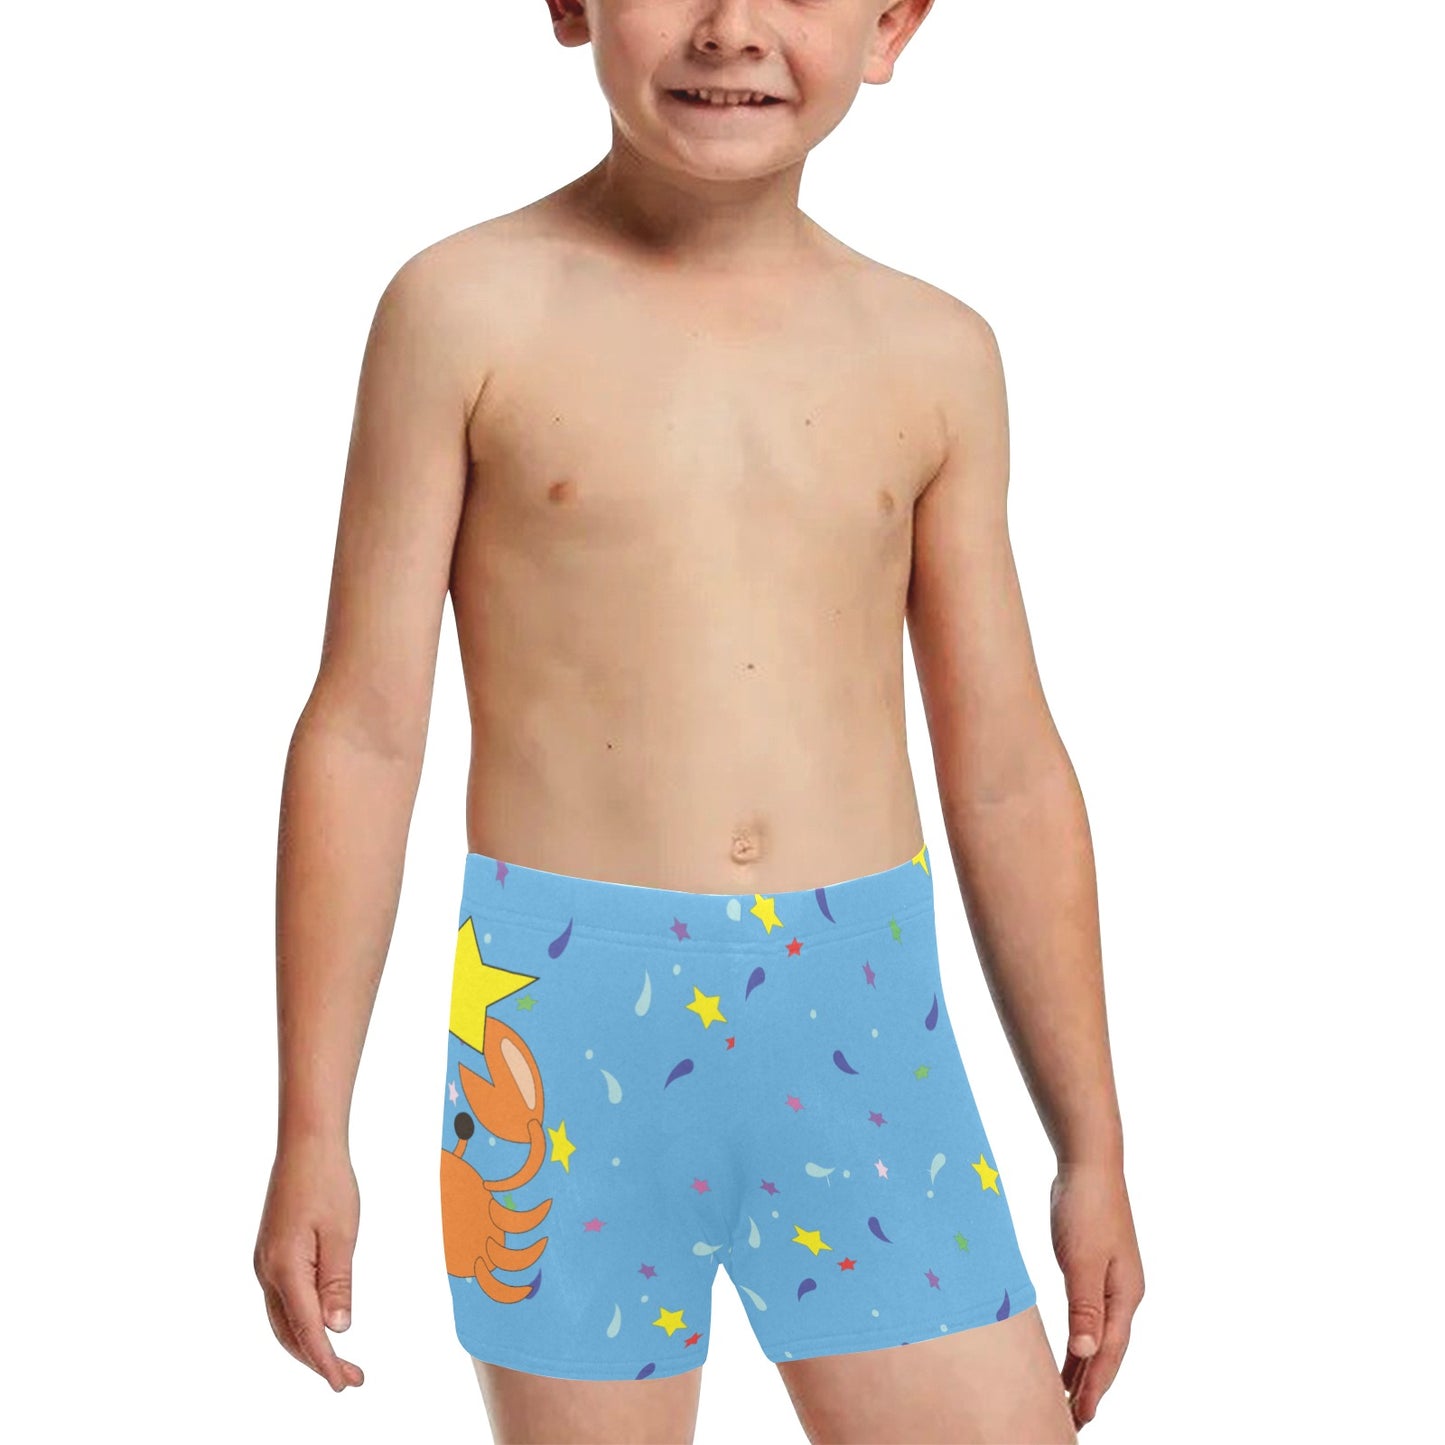 Boys' Swimming Trunks "patterned stars w/crabby"